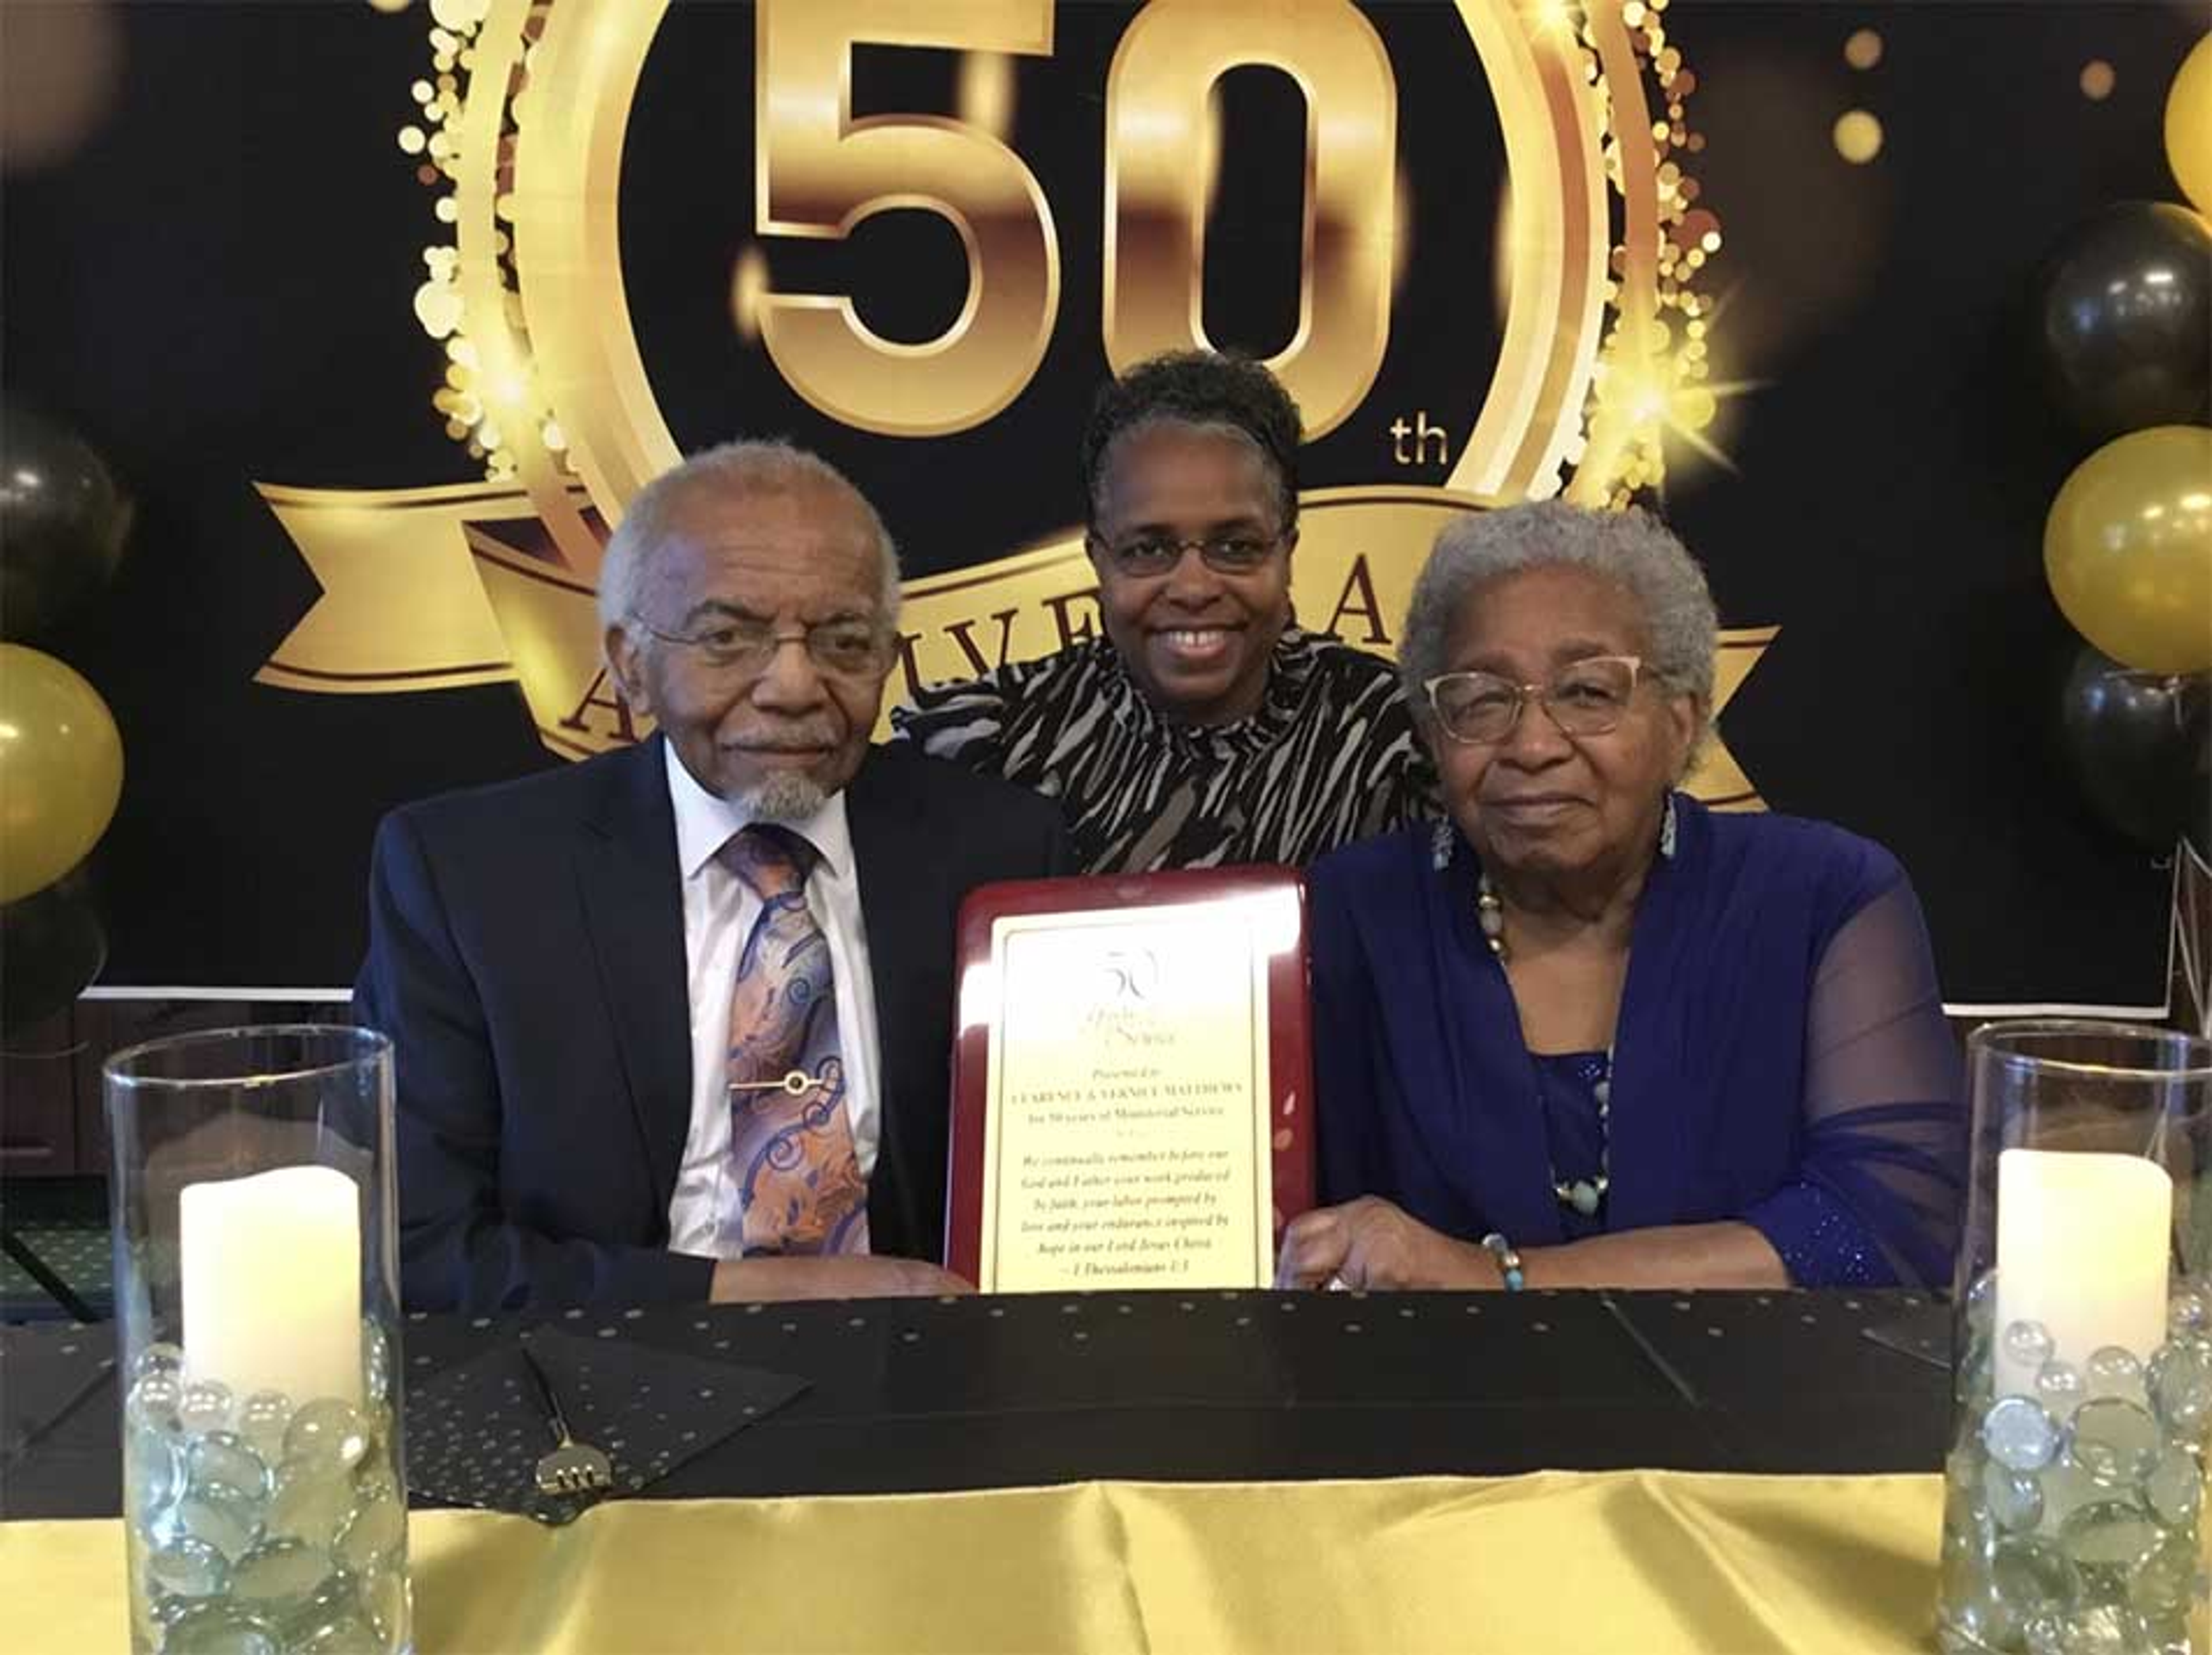 Clarence and Vernice Matthews receive honors for 50 years of community service in Princeton, NJ